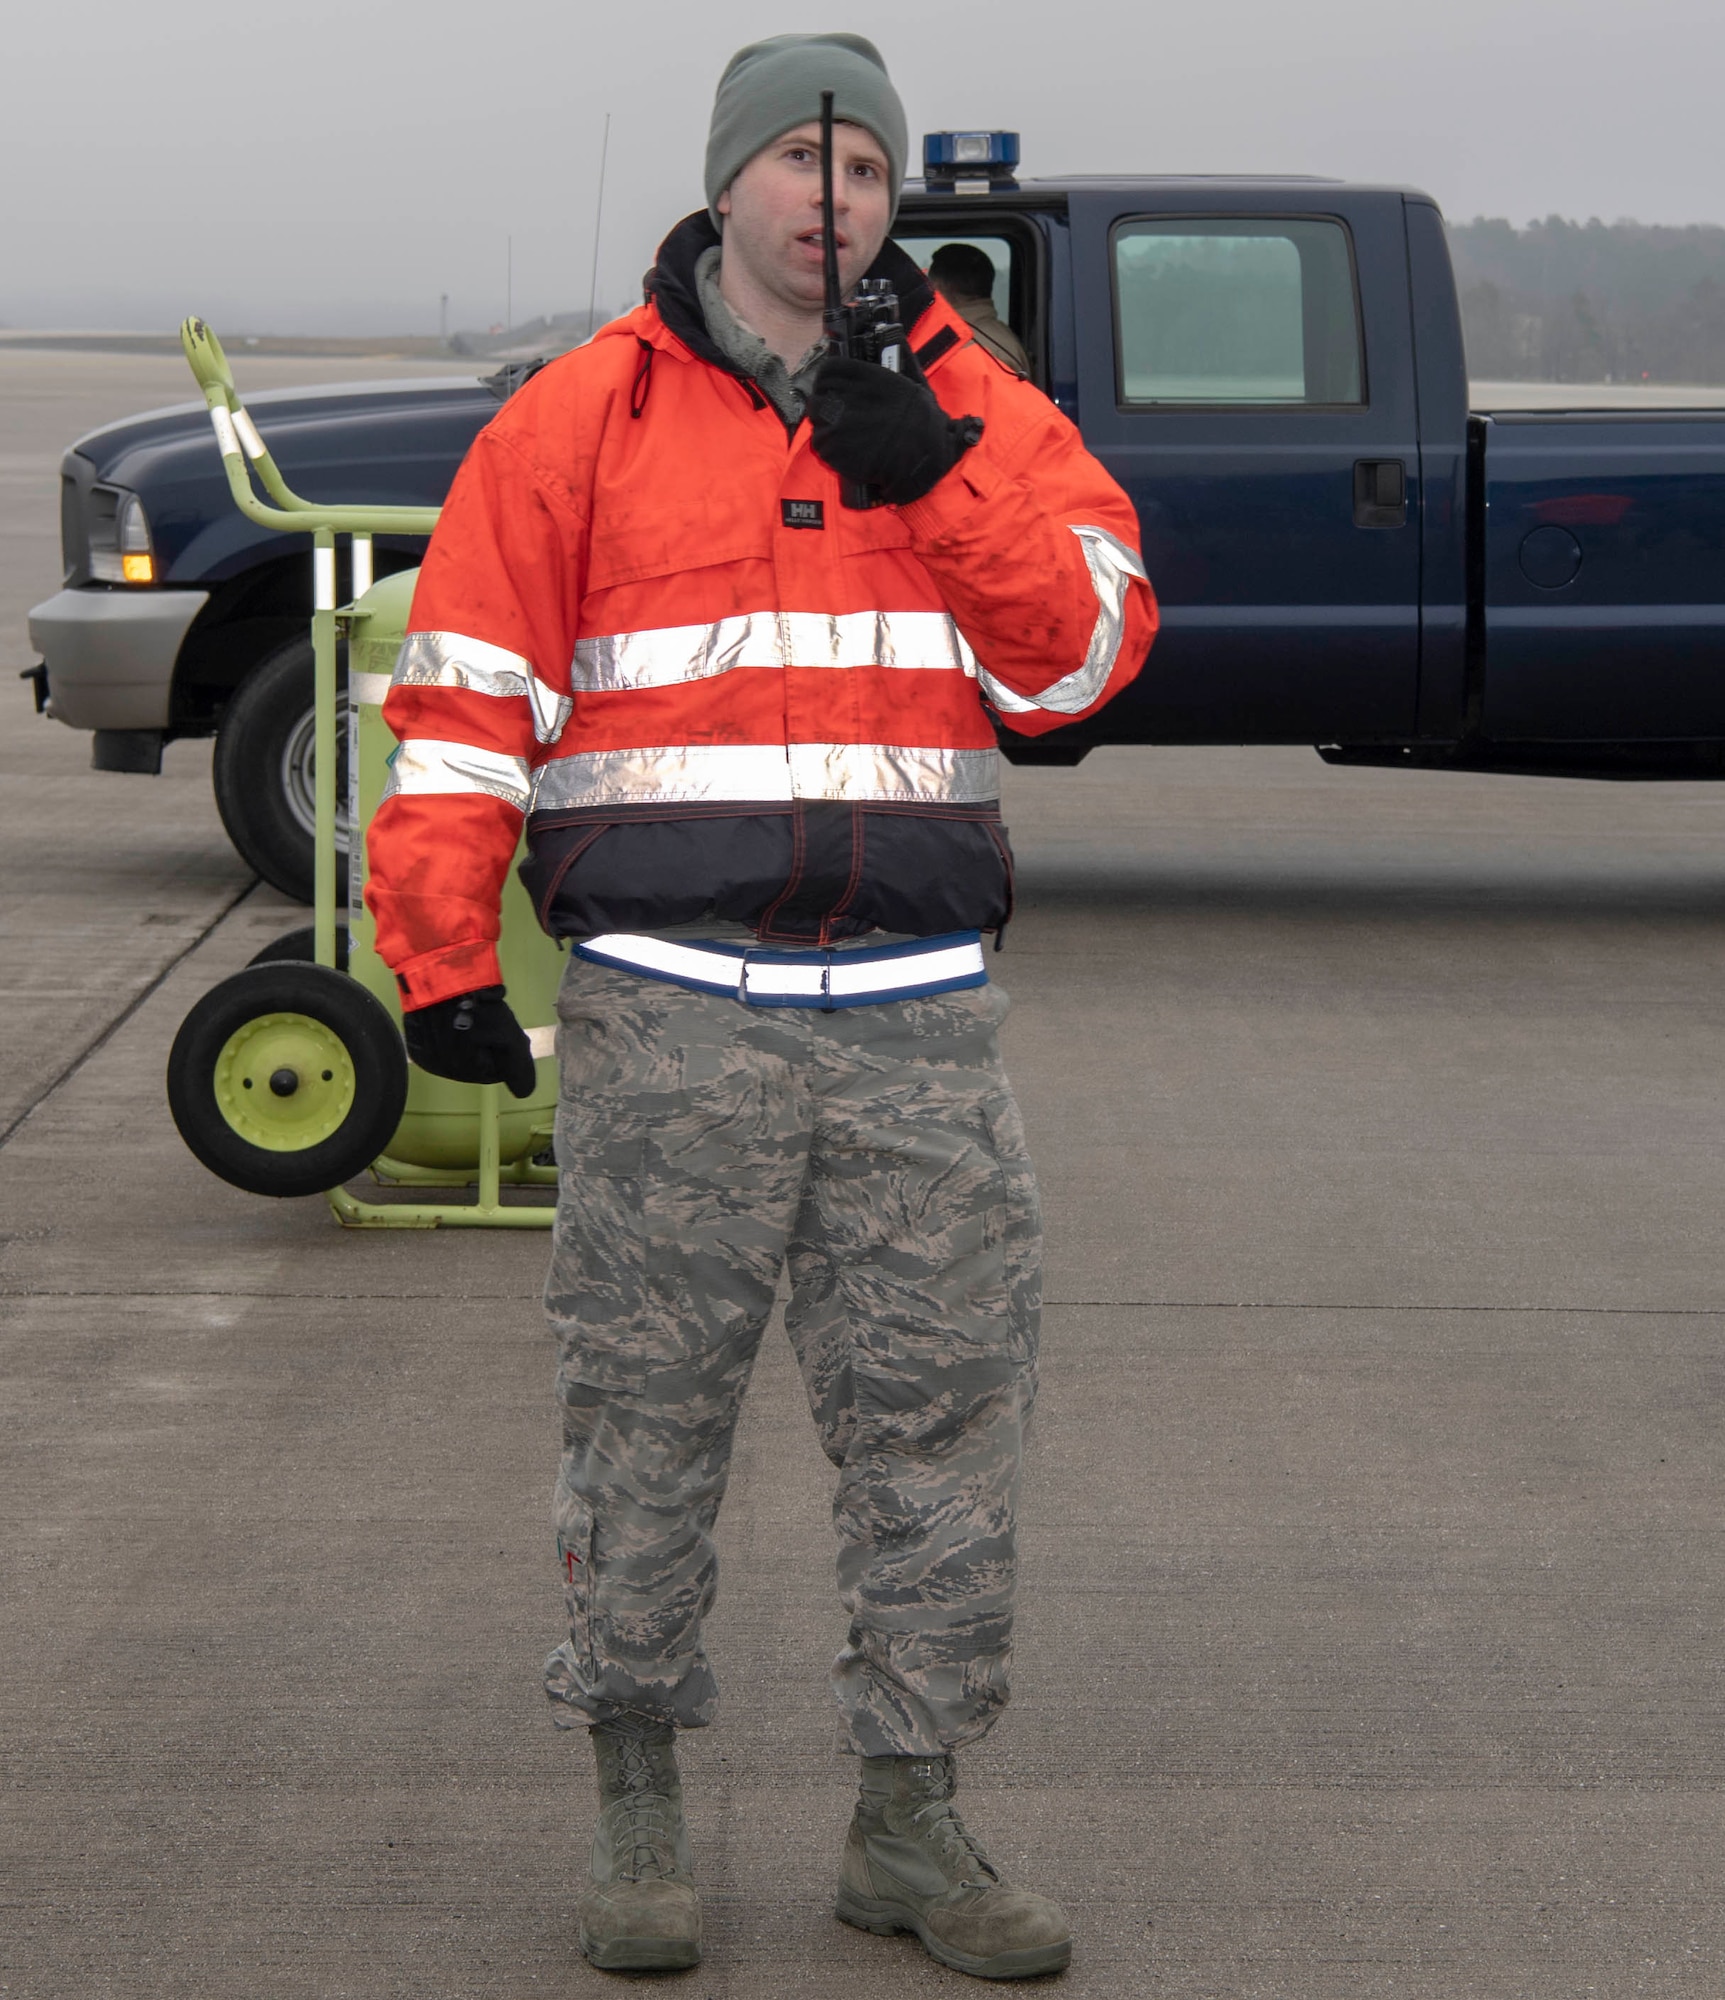 U.S. Air Force Staff Sgt. Michael Morrissey, 726th Air Mobility Squadron systems craftsman, radios in a simulated fall for a rescue exercise at Spangdahlem Air Base, Germany, Jan. 23, 2020. The fall protection exercise is part of annual training members of the 726th AMS undergo. (U.S. Air Force photo by Senior Airman Kyle Cope)